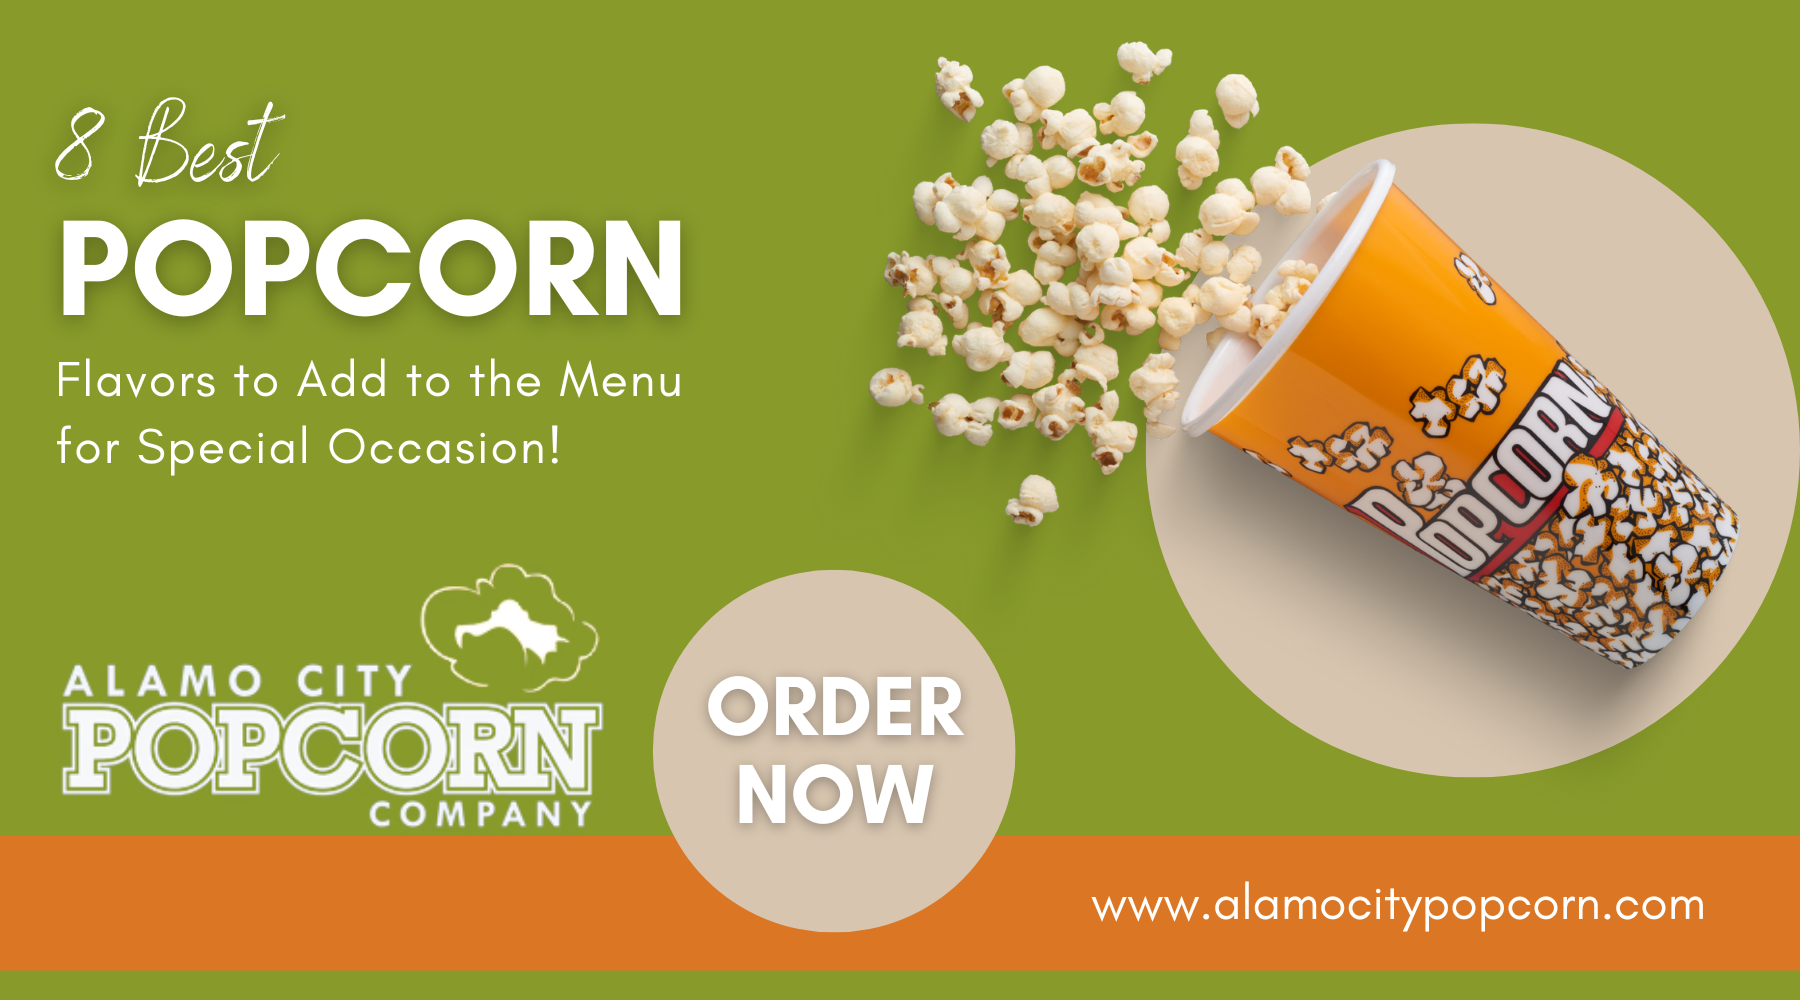 8 Best Popcorn Flavors to Add to the Menu for Special Occasion!